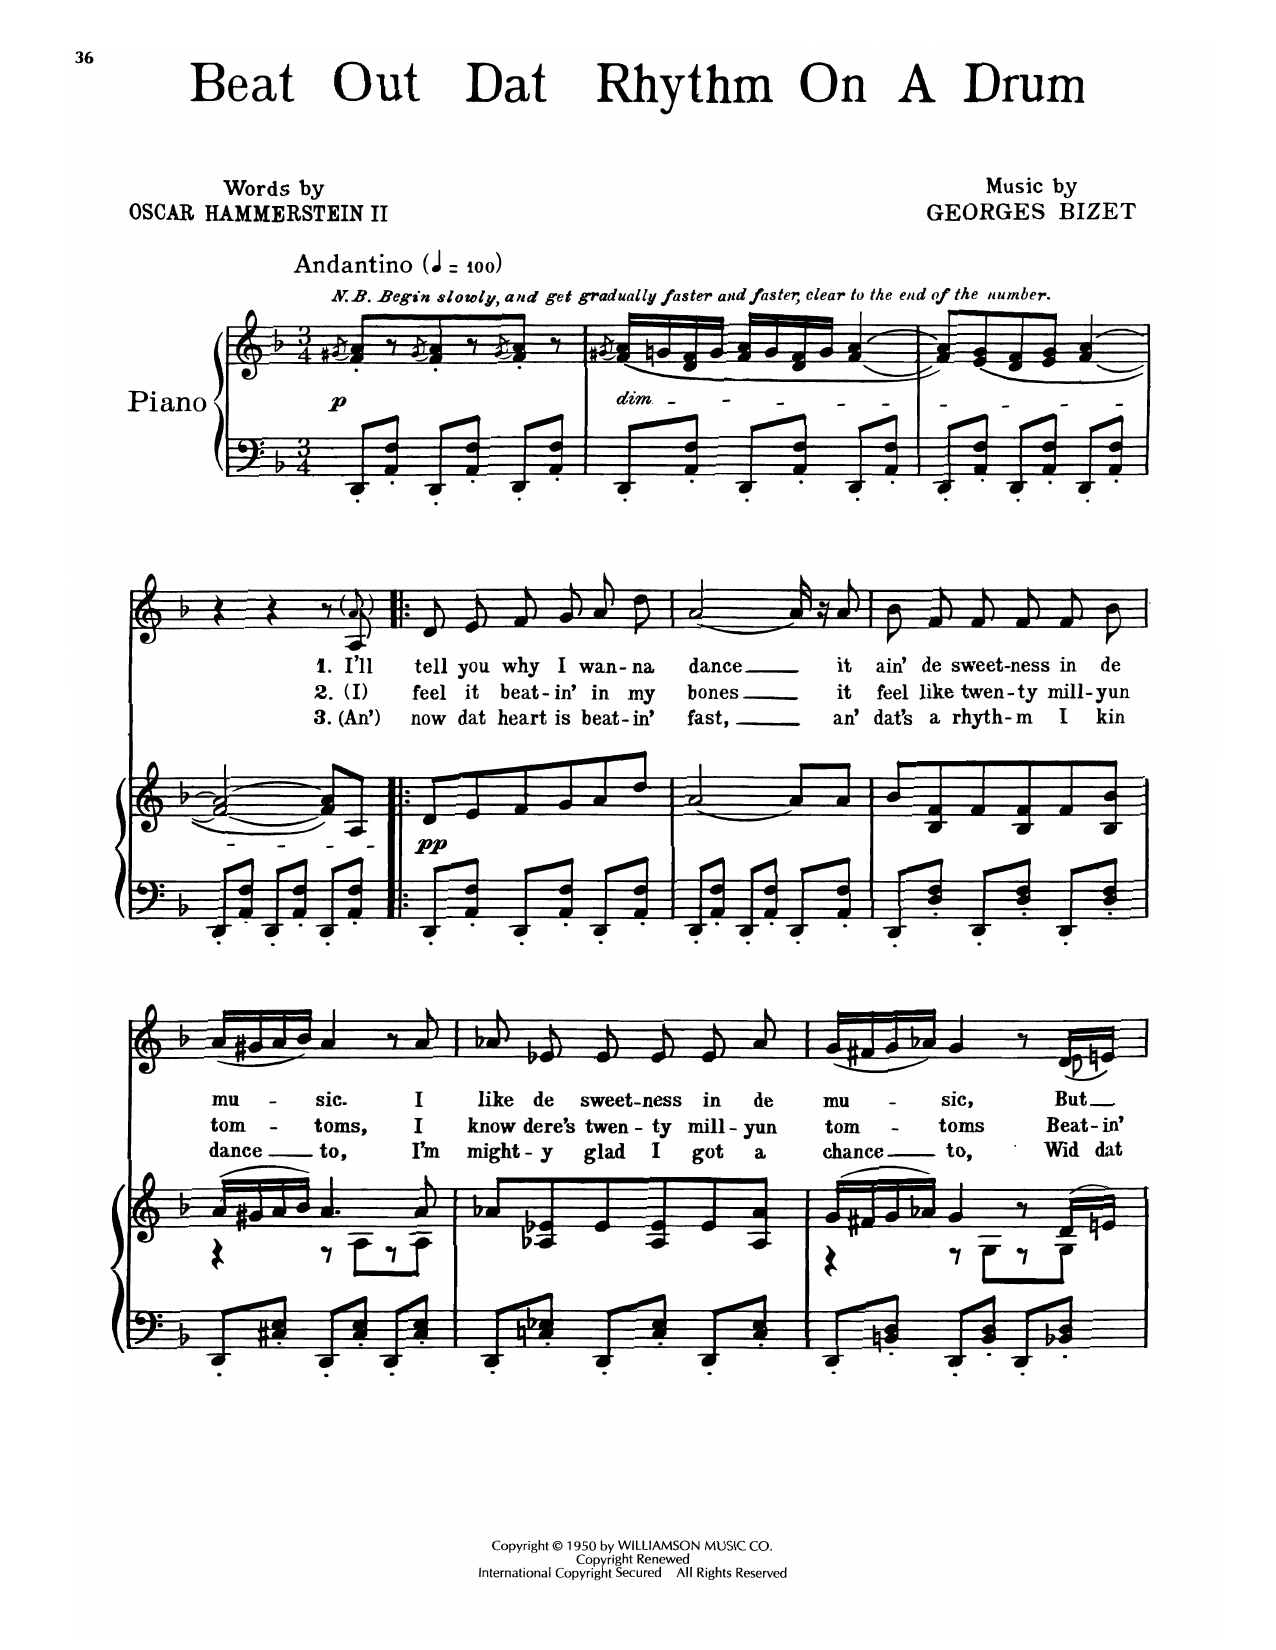 Download Oscar Hammerstein II & Georges Bizet Beat Out Dat Rhythm On A Drum (from Car Sheet Music